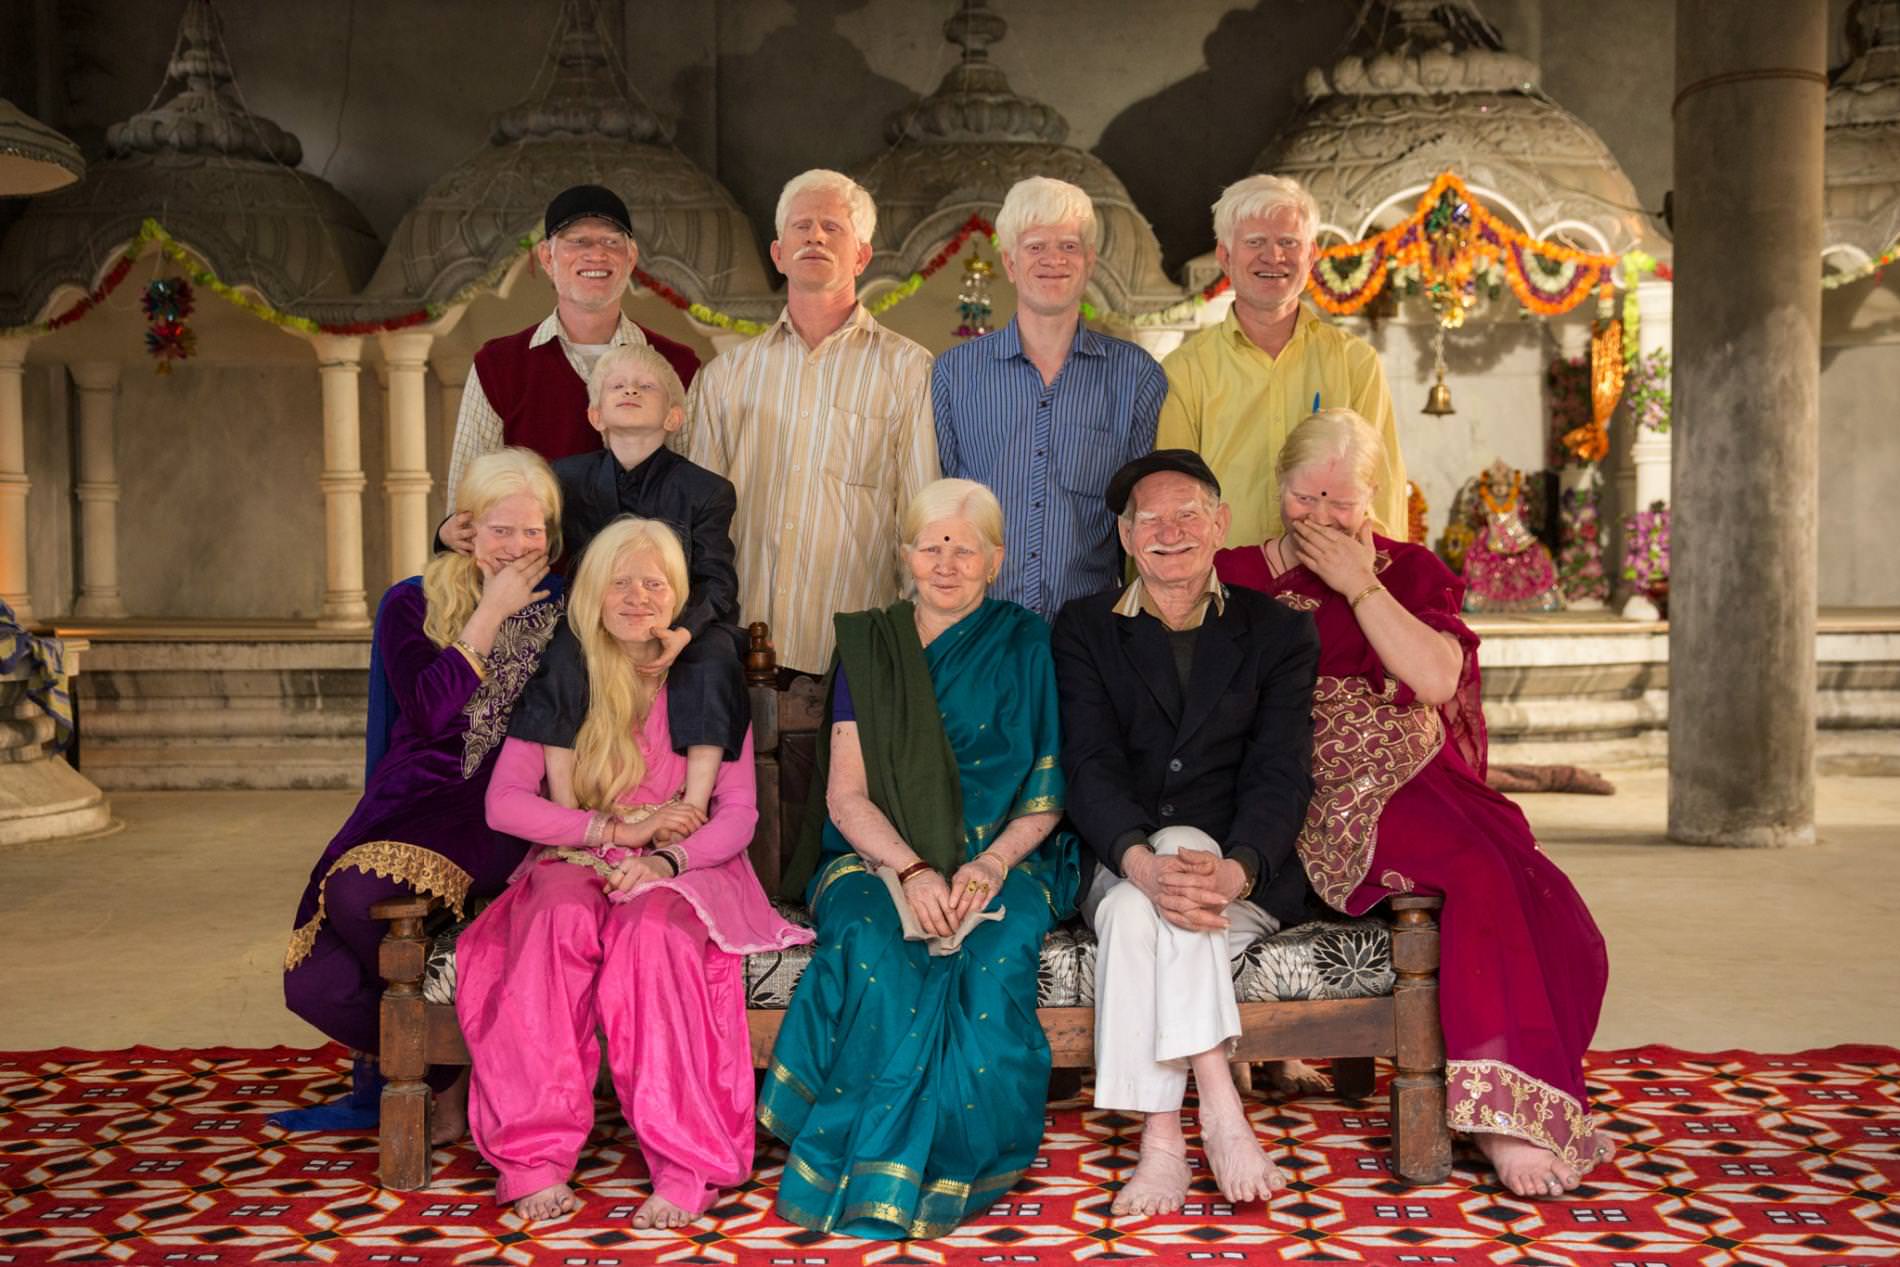 At a Hindu temple near their home in Delhi, India, three generations of a family with albinism pose for a rare family portrait